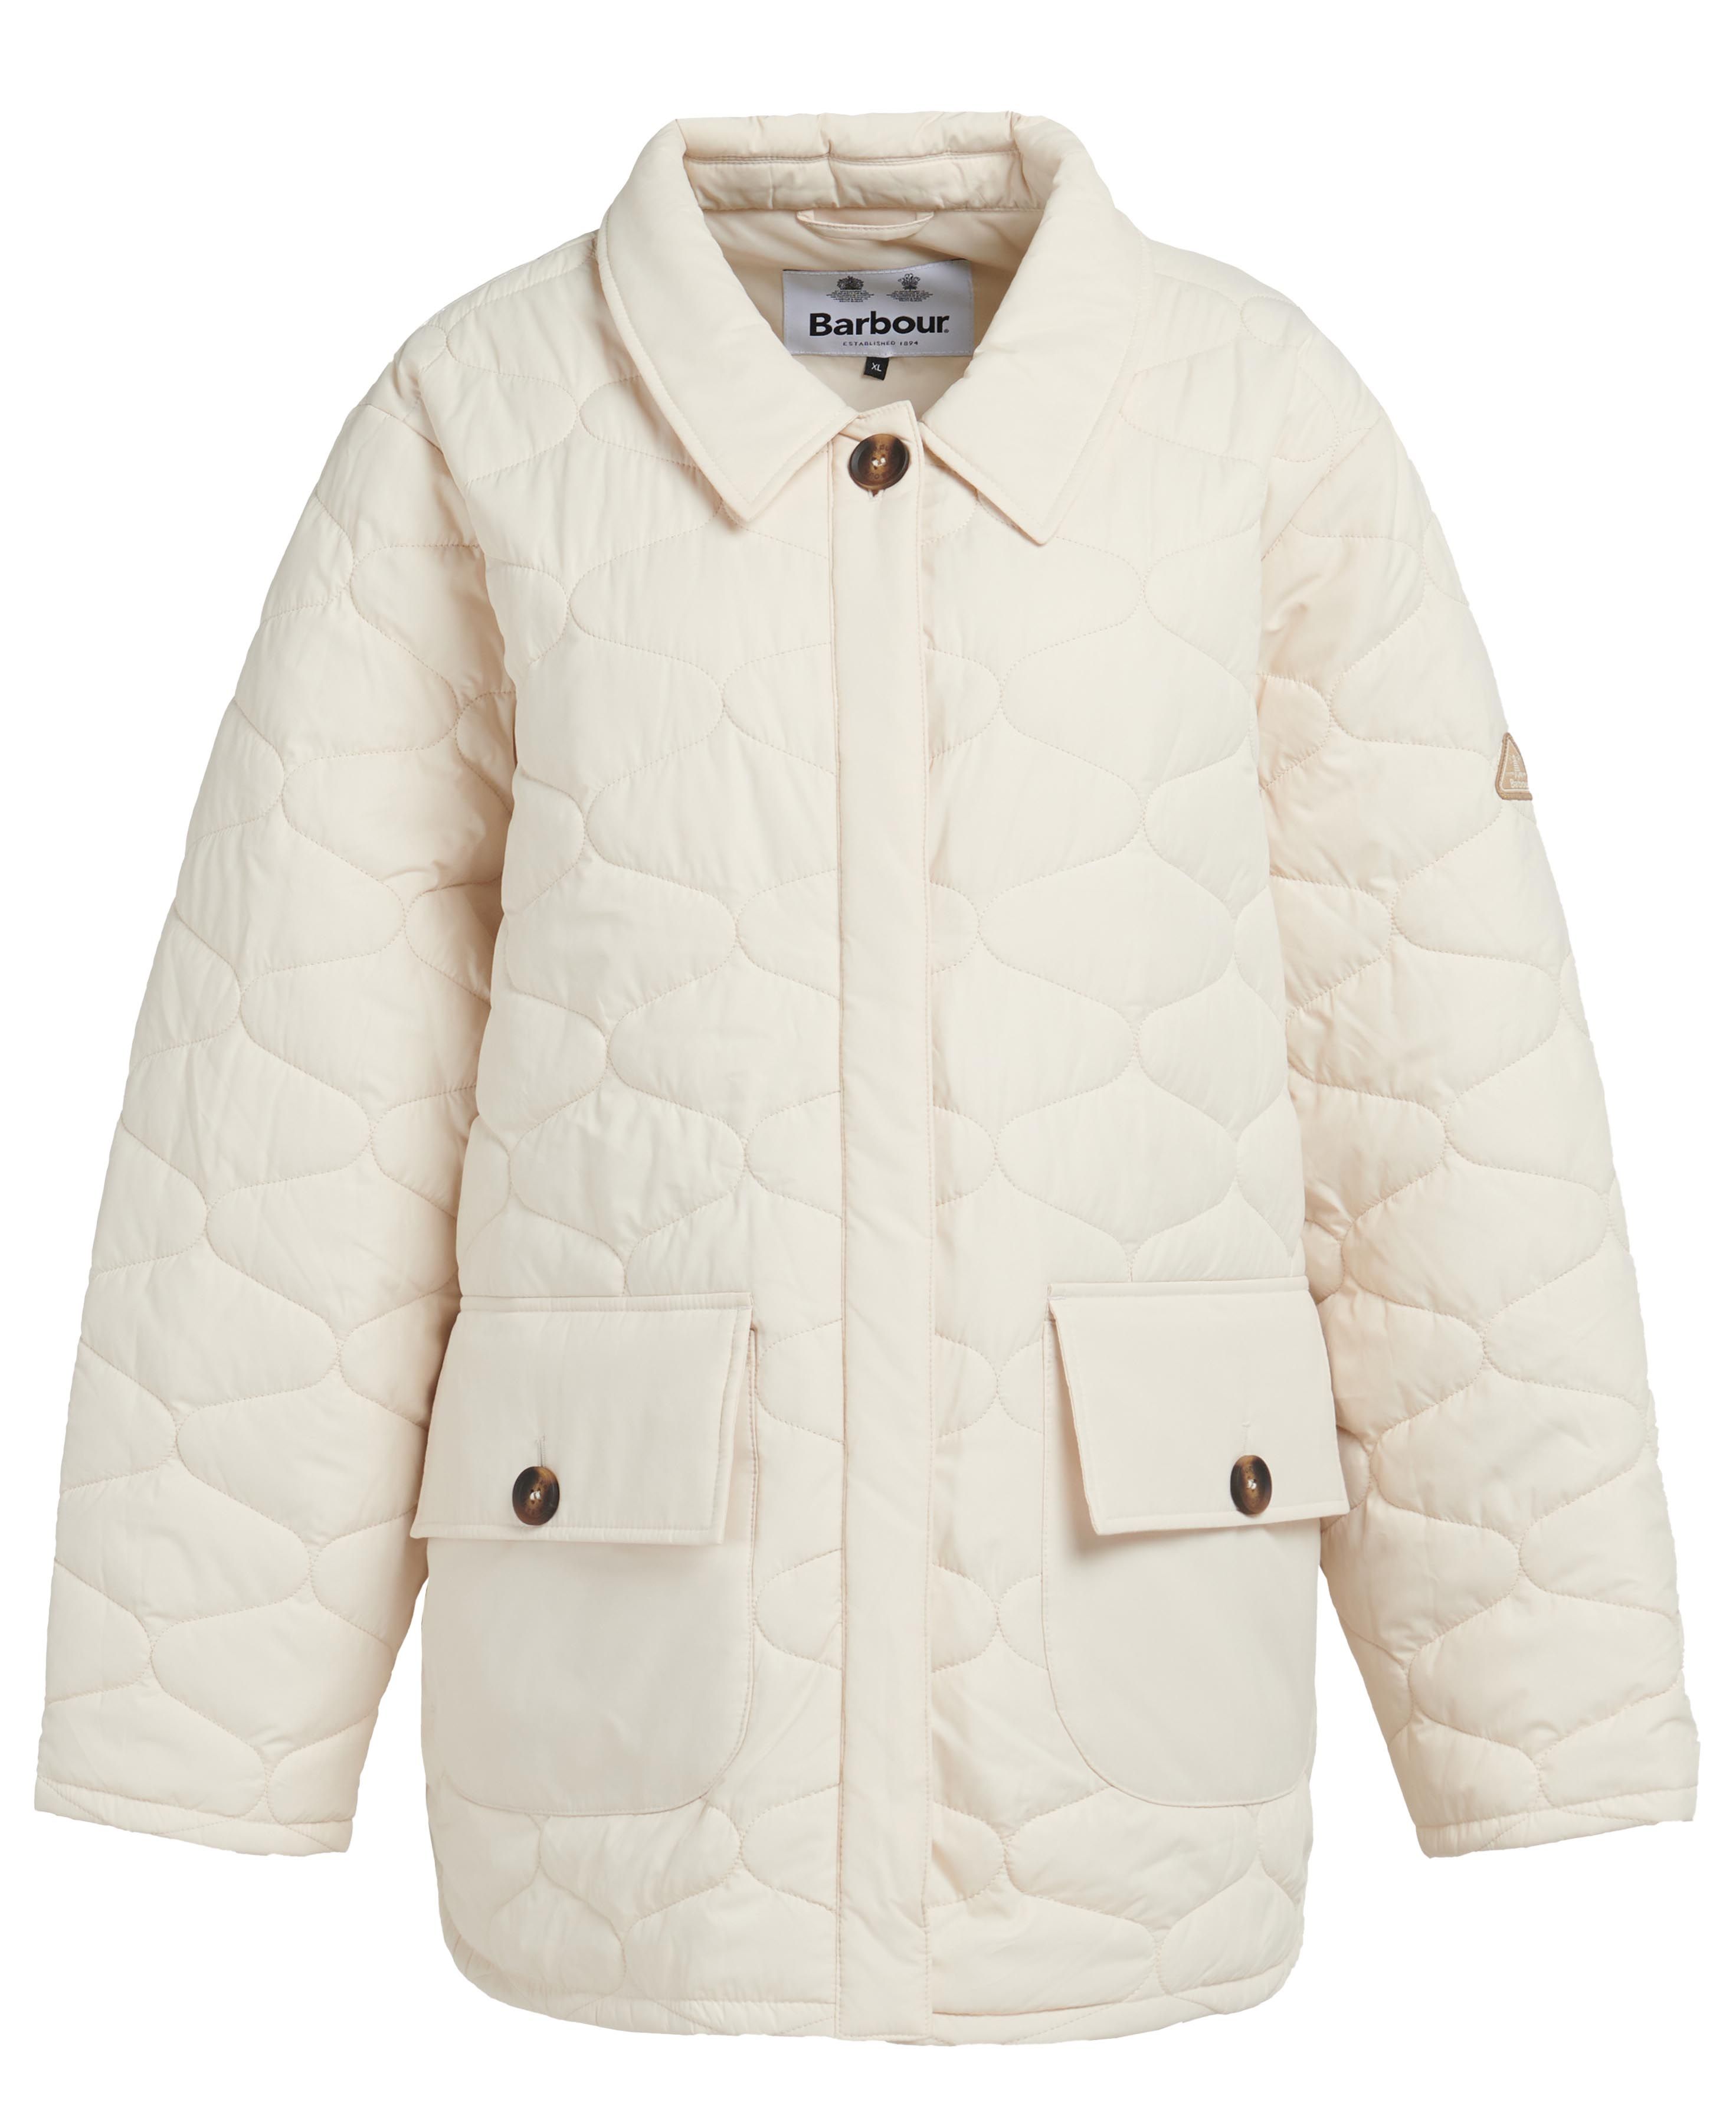 Shop the Barbour Plus Leilani Quilted Jacket today. | Barbour